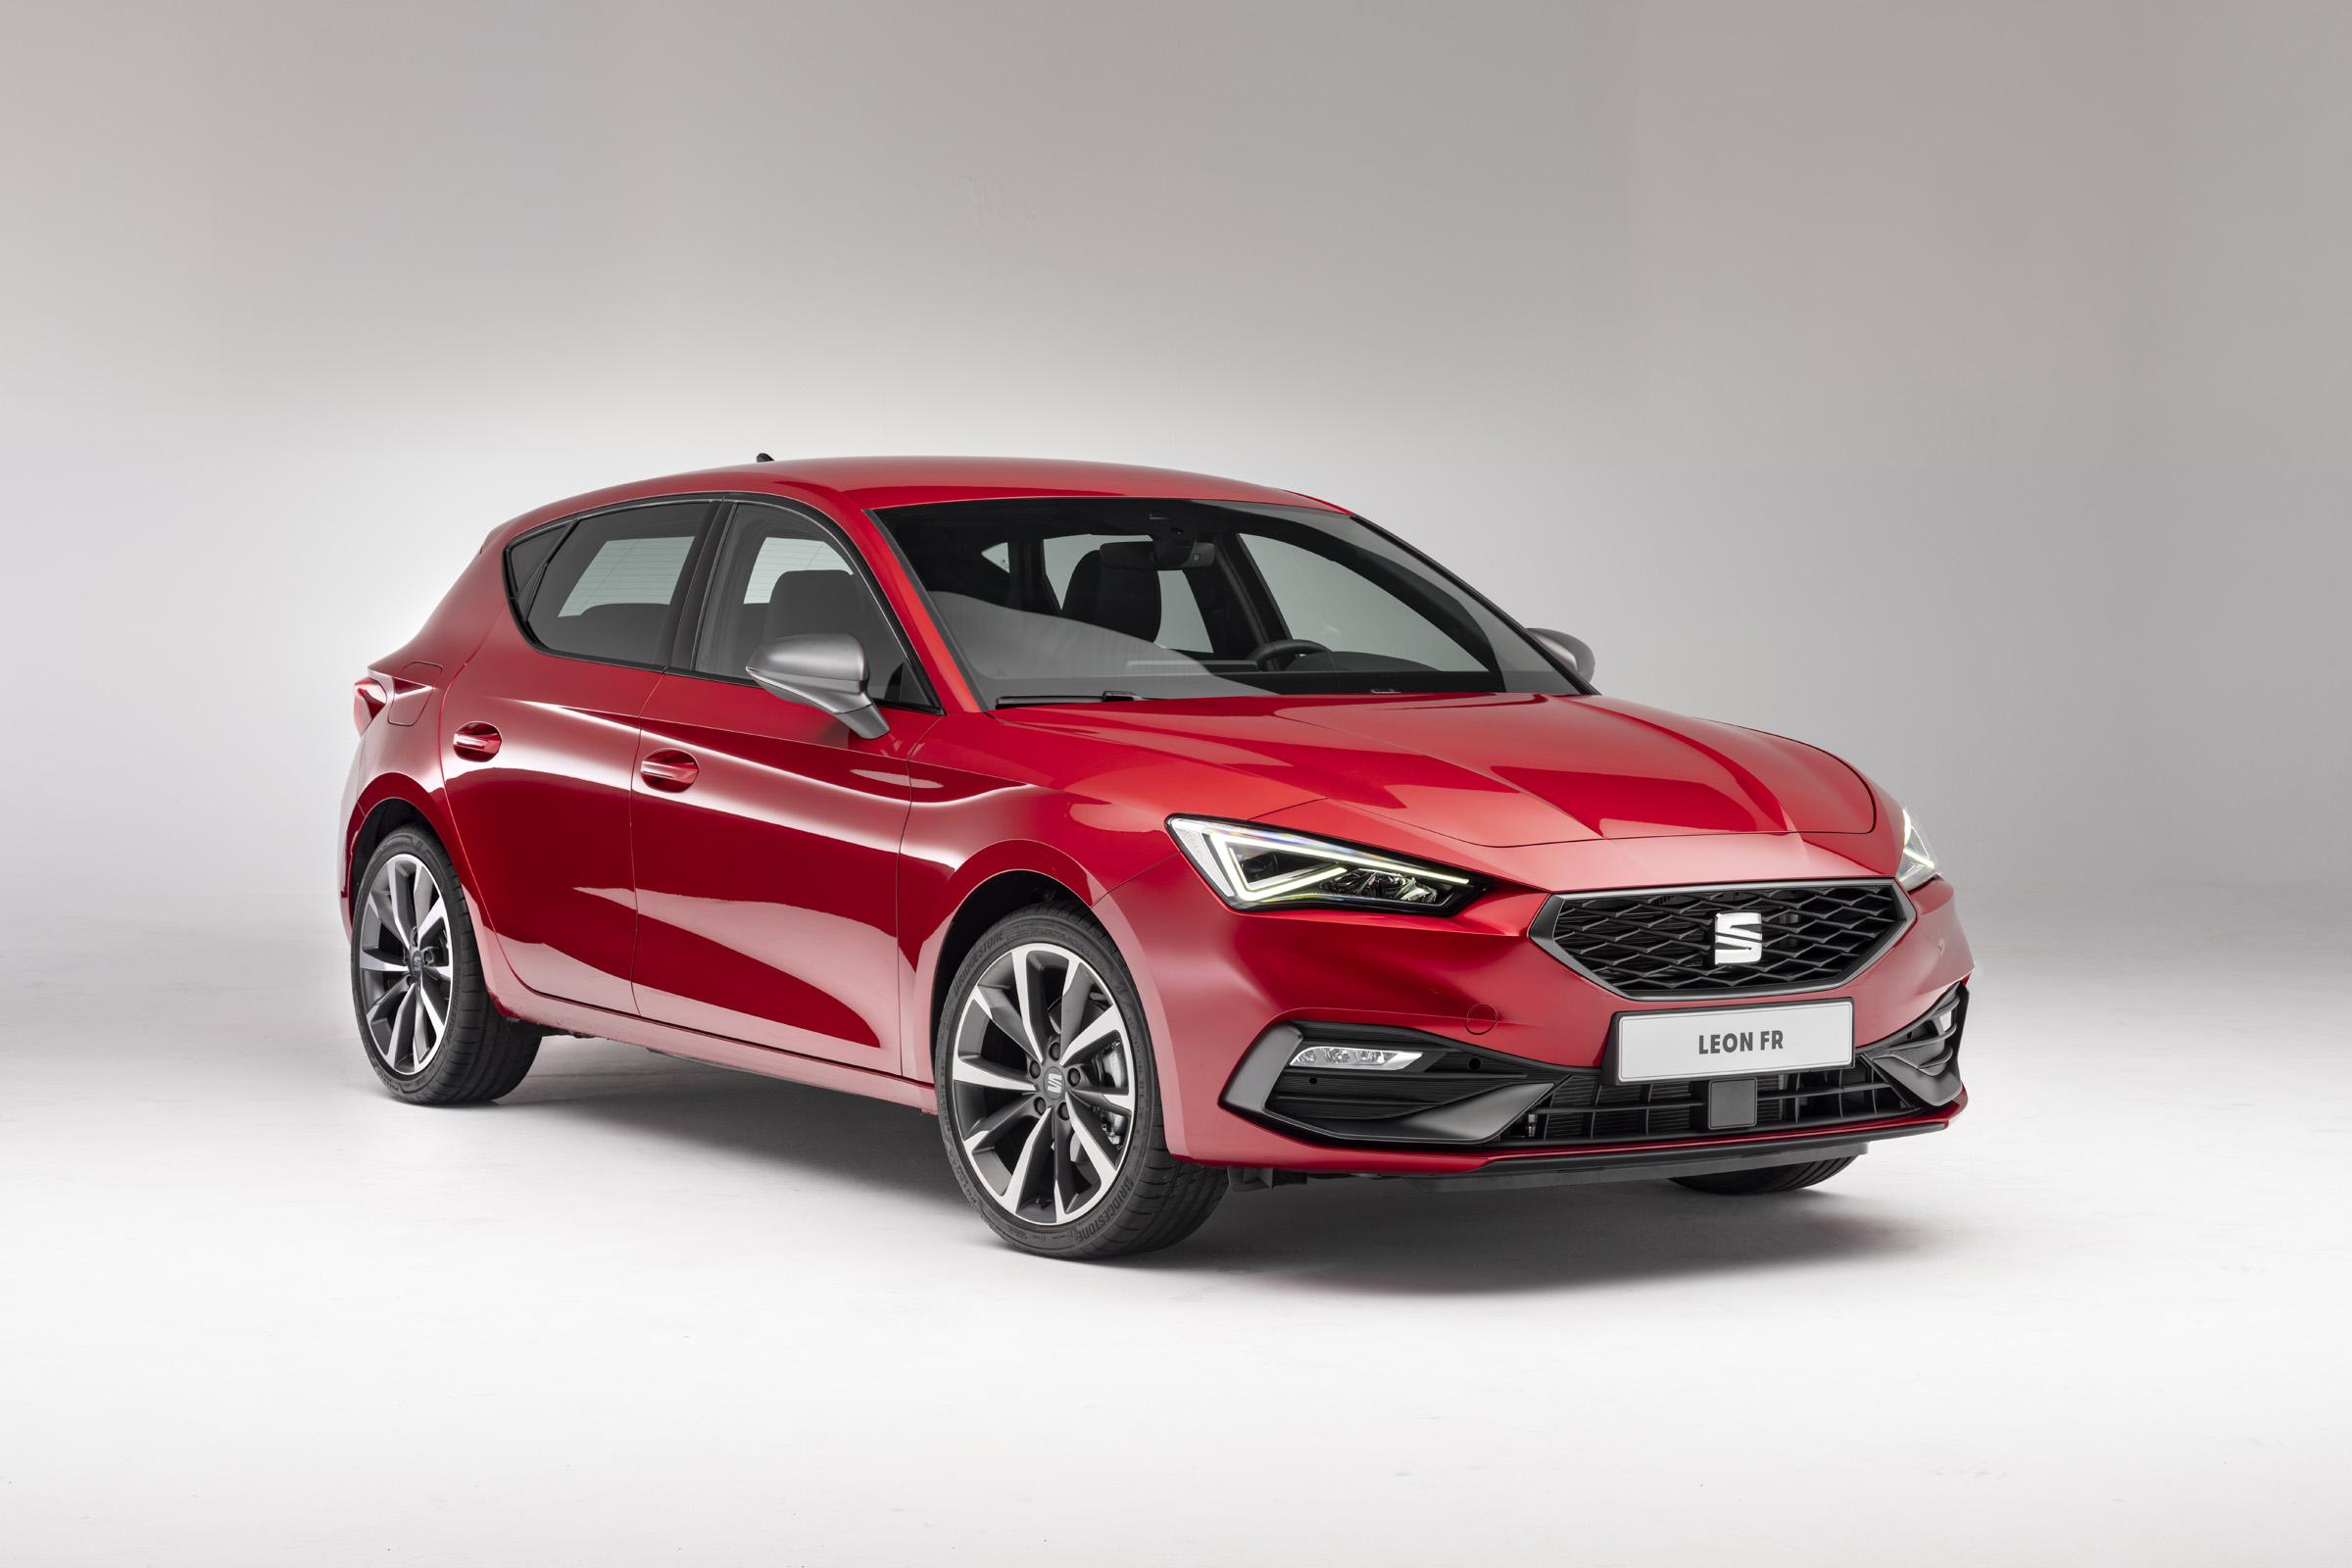 Seat Leon IV 1.5 TSI (KL) (04/2020 -) has now been boosted up with